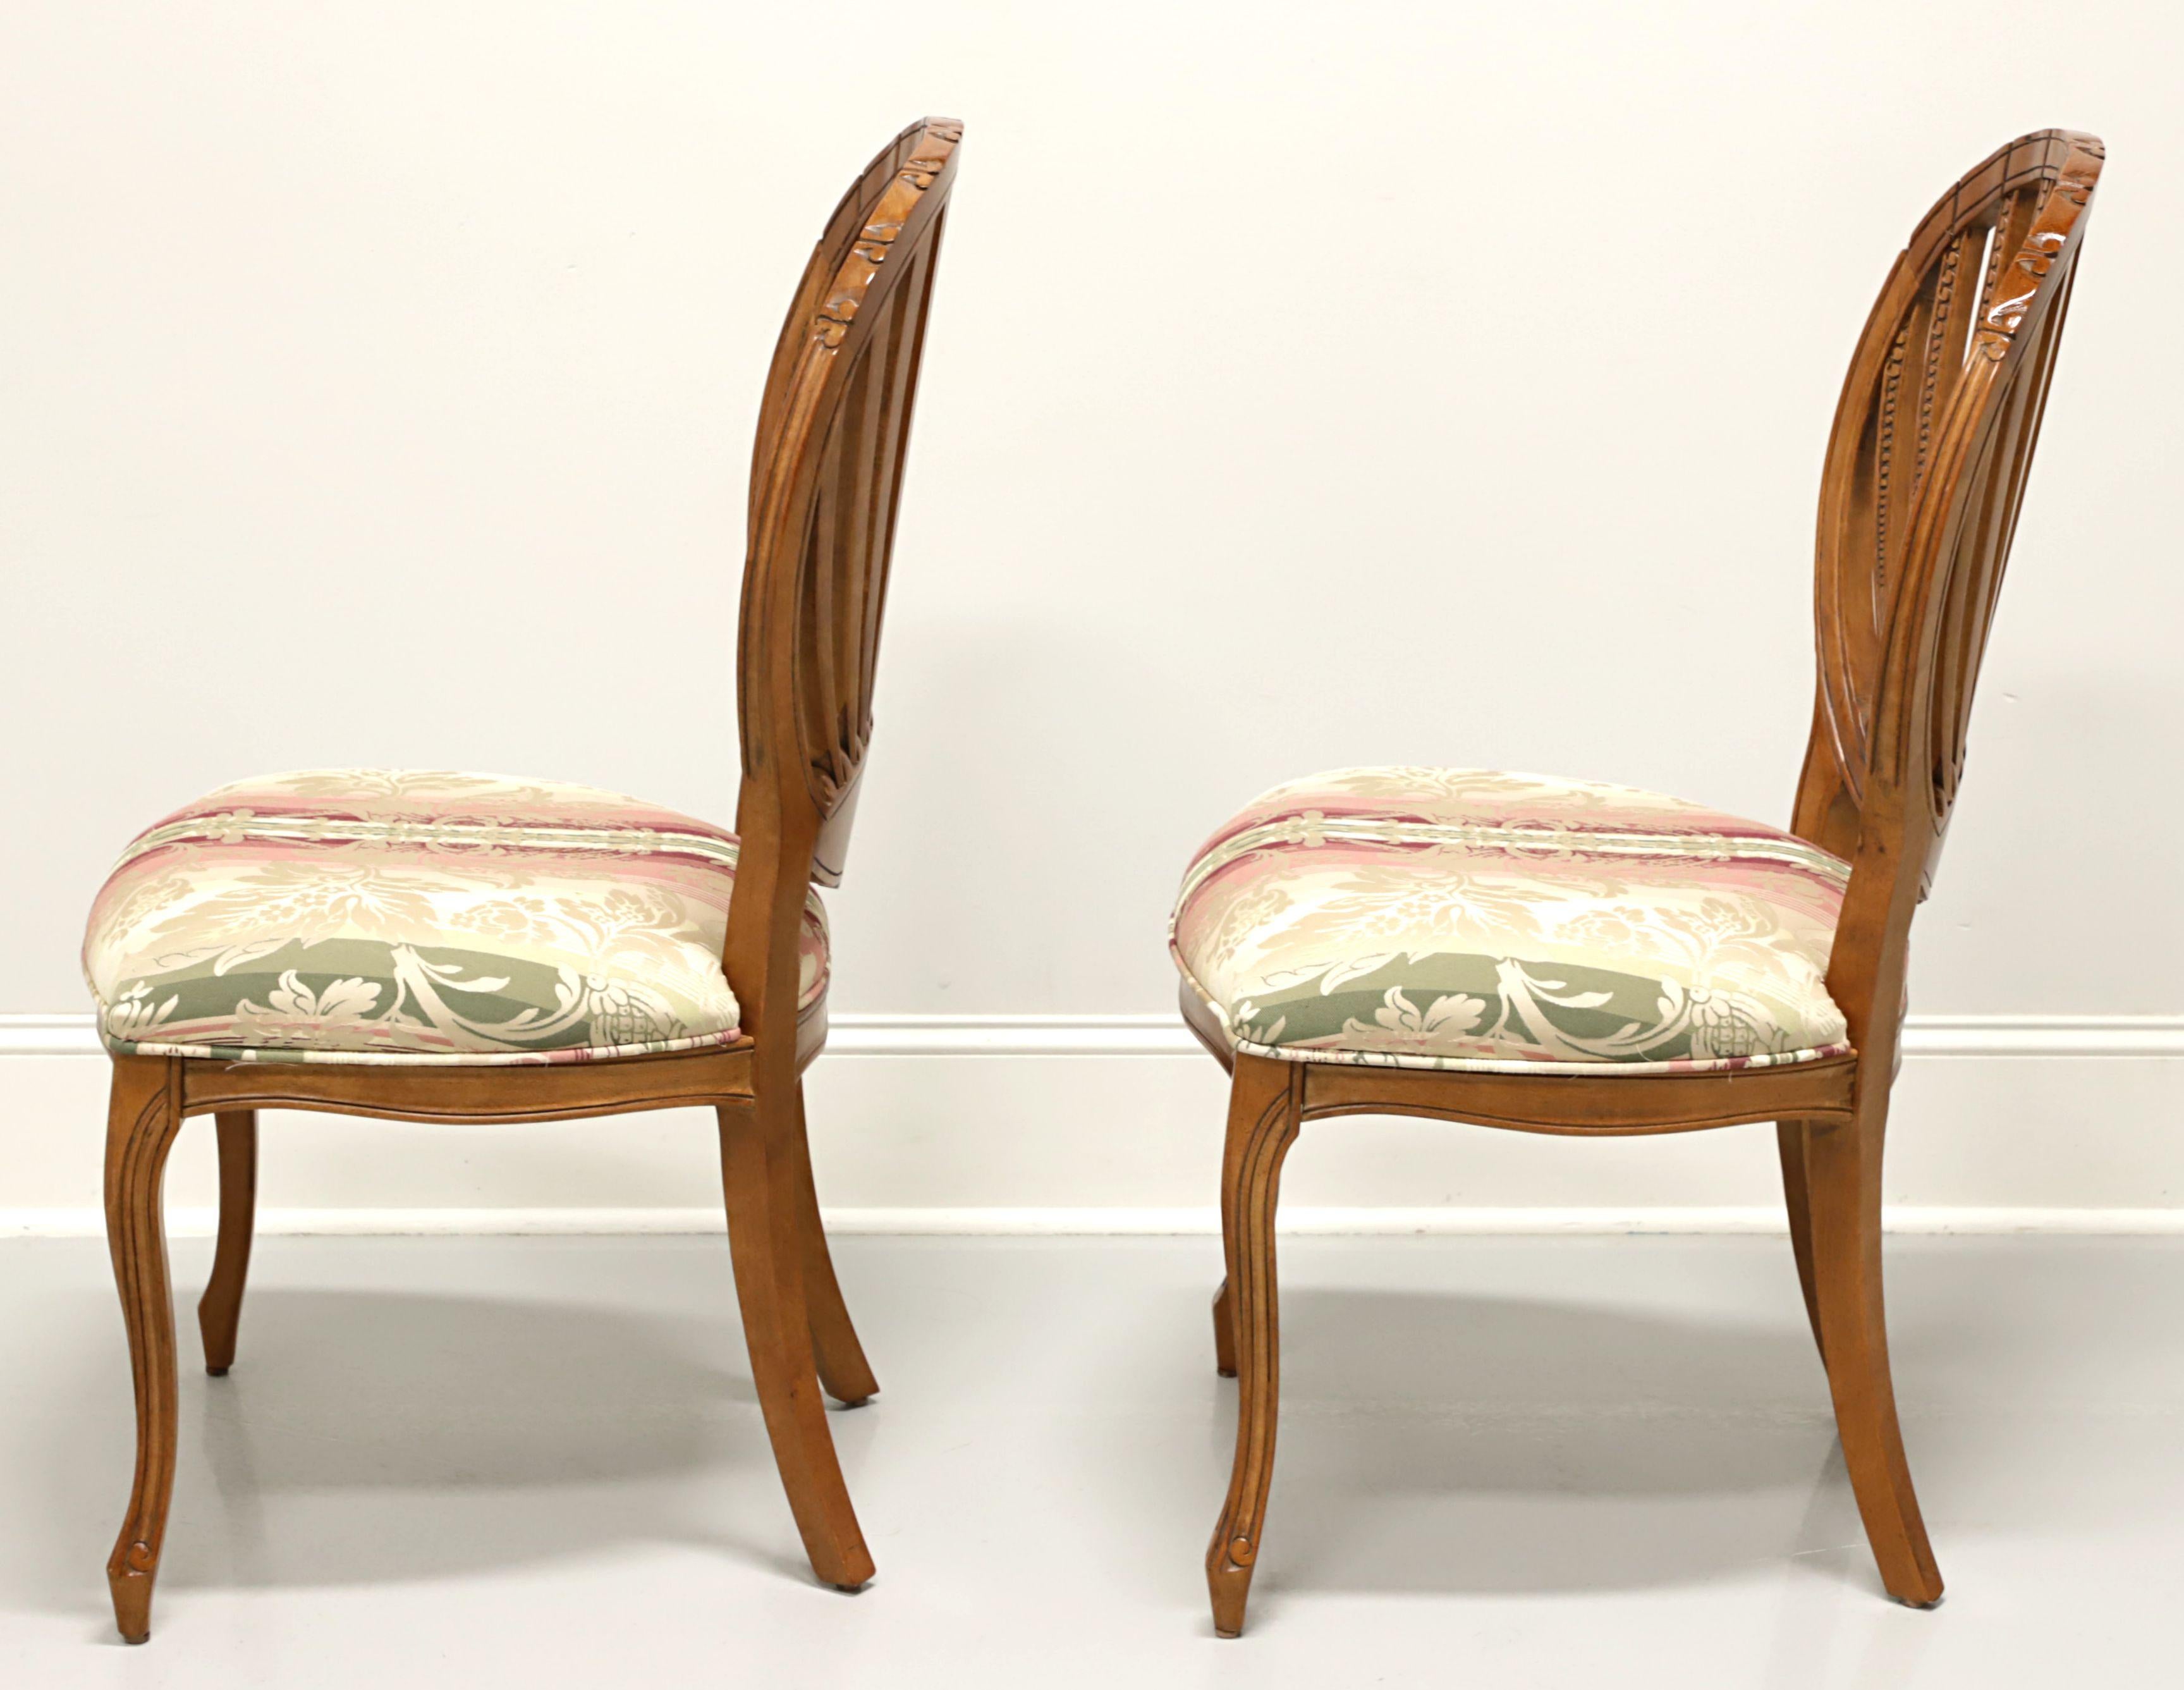 XXIe siècle et contemporain CENTURY French Country Oval Back Dining Side Chairs - Pair B en vente